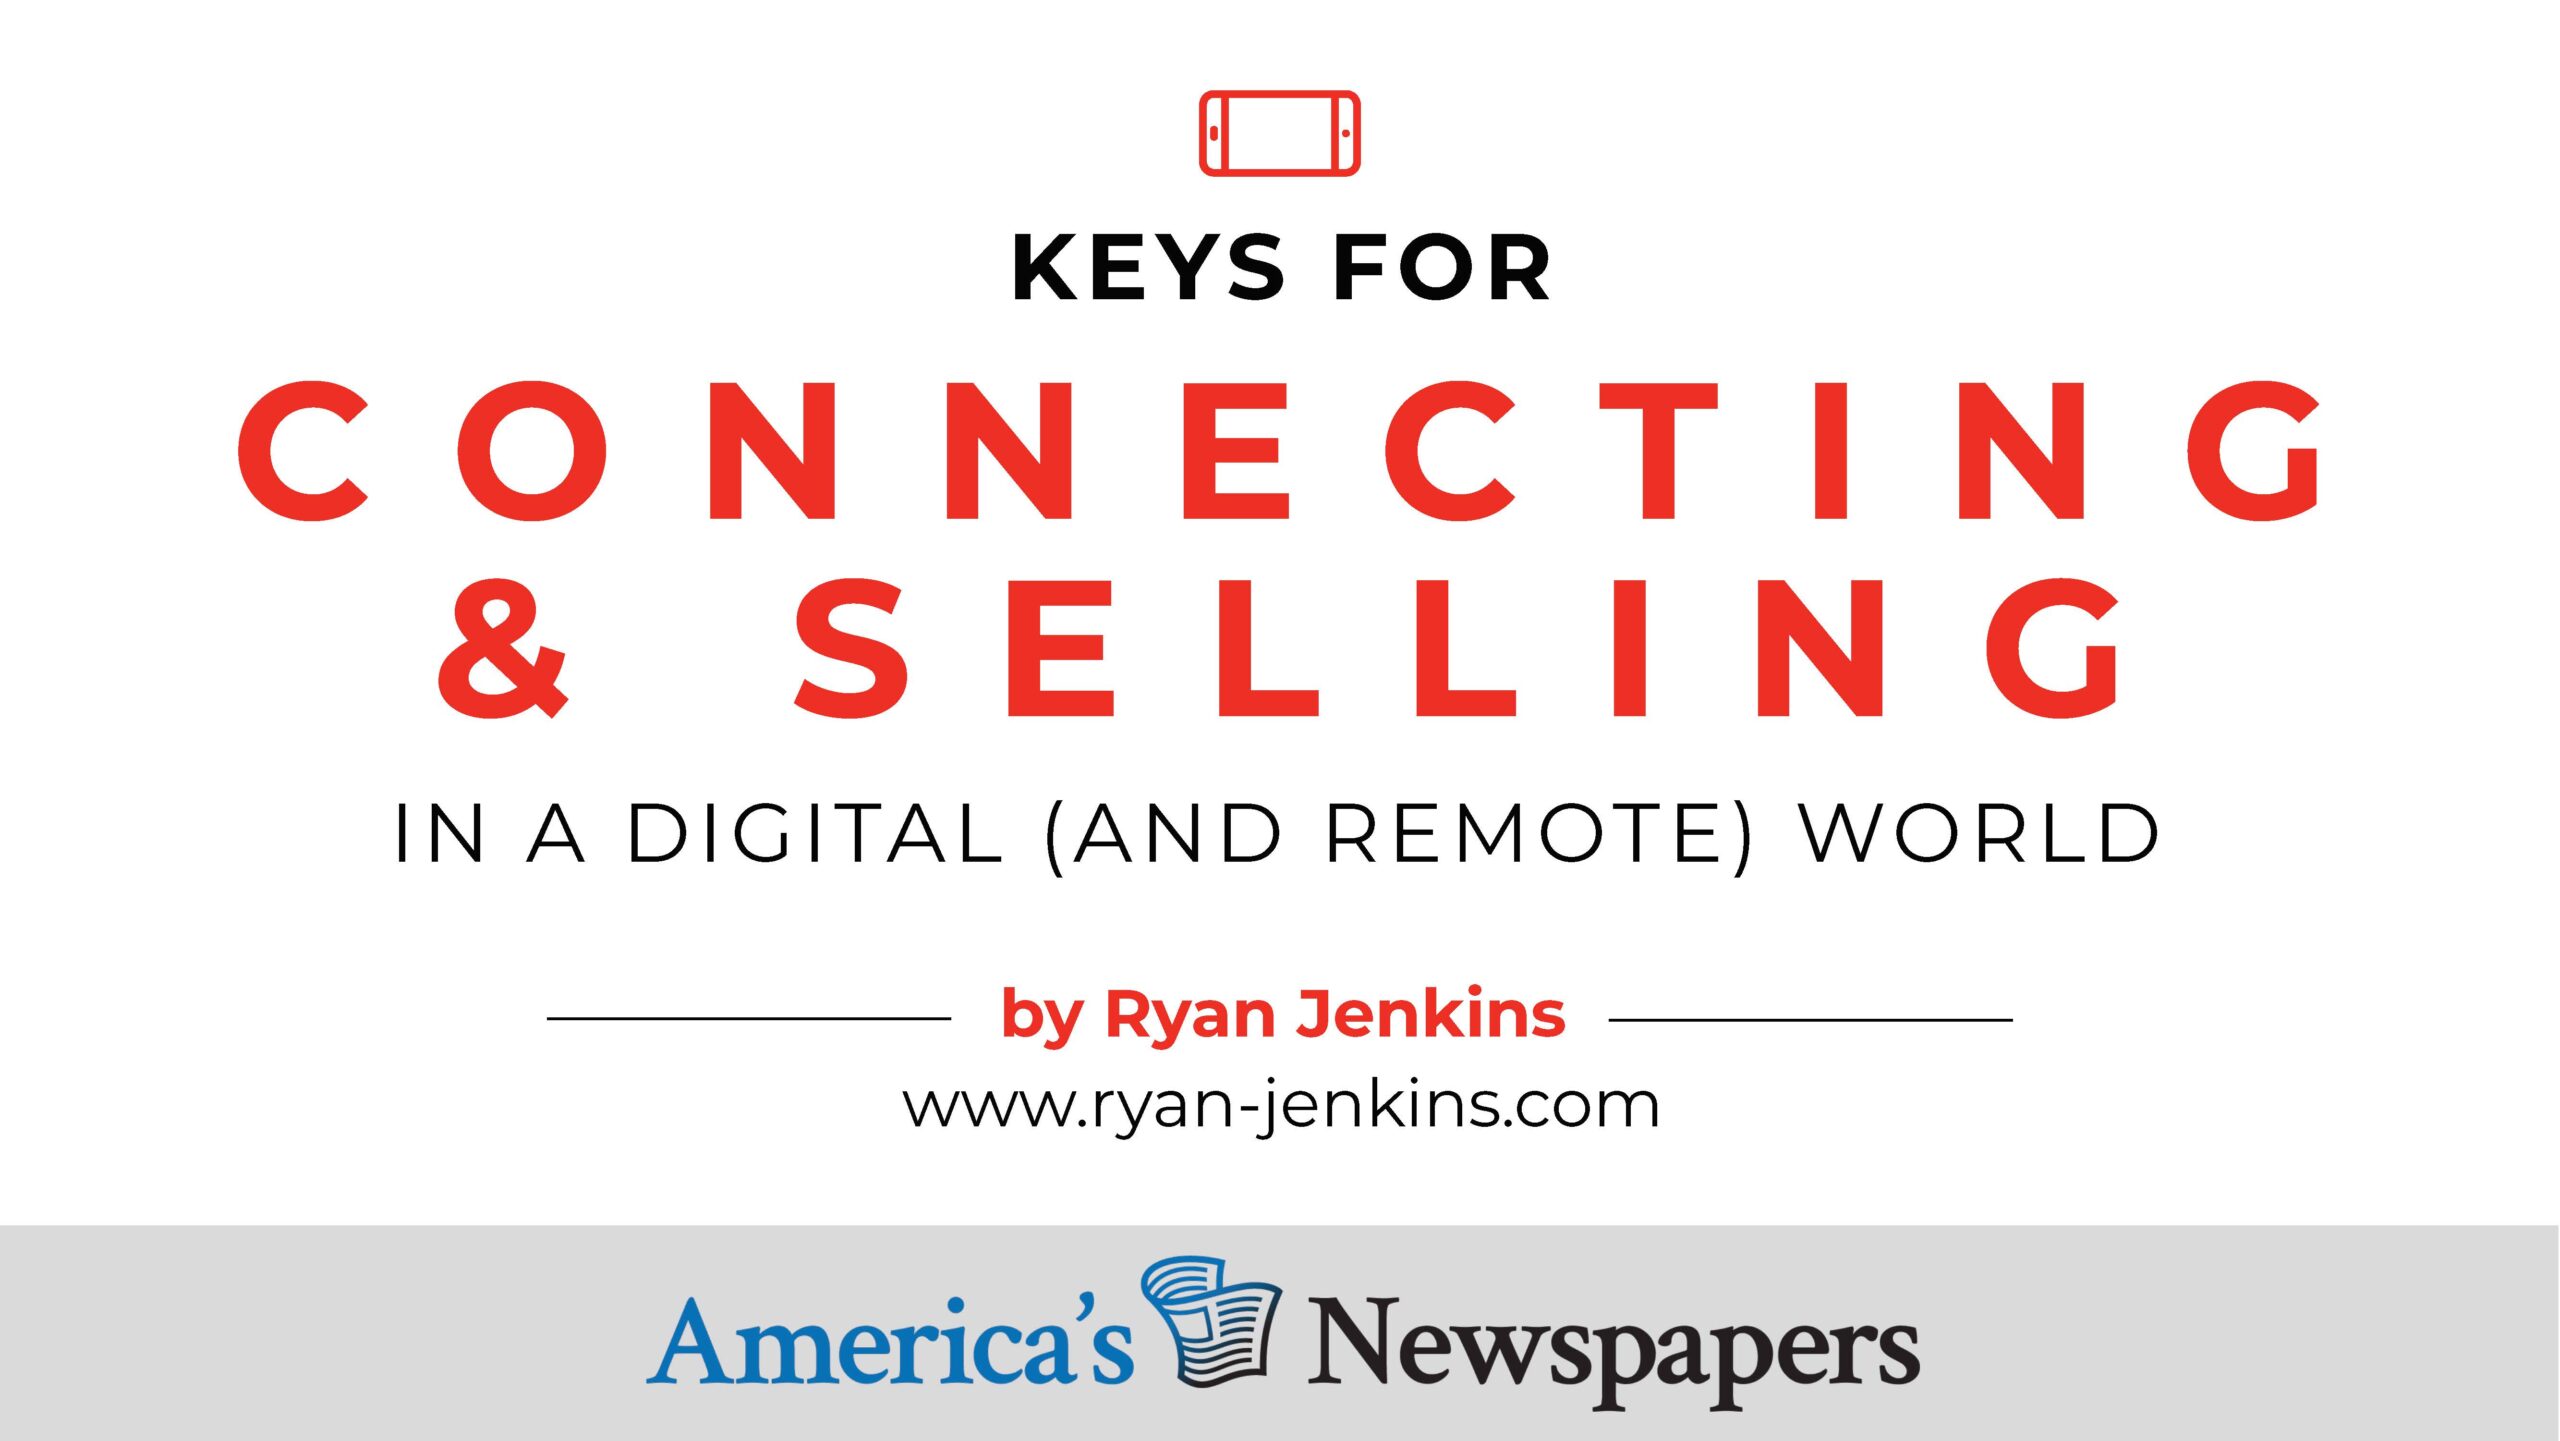 Keys-for-Connecting-and-Selling-in-a-Digital-and-Remote-World.pdf_Page_01